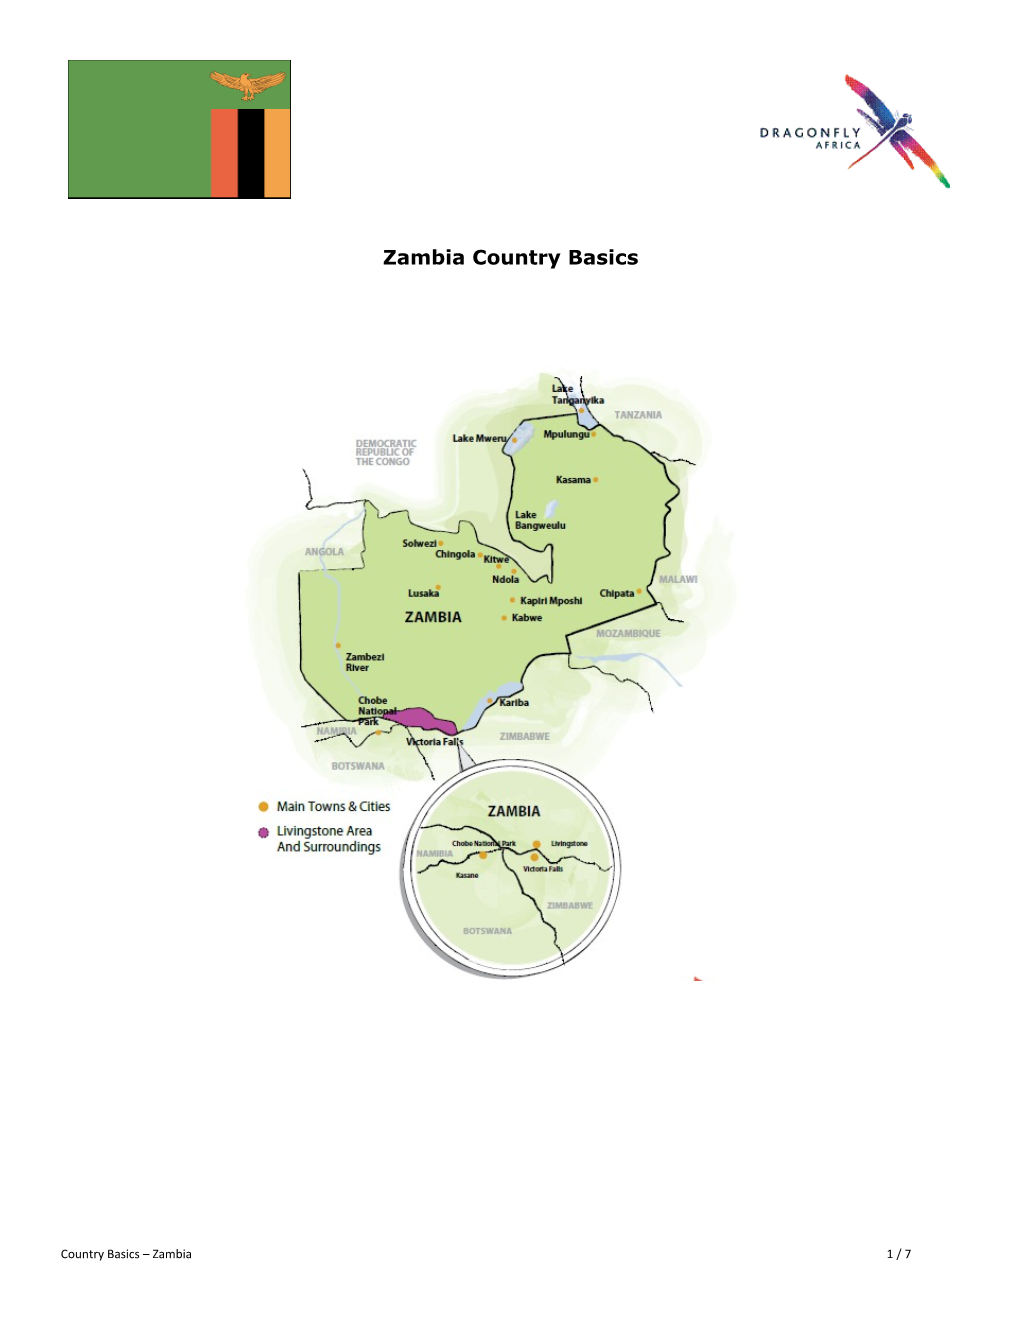 For More Information on Countries That Are Subject To/Exempt from Zambian Visas